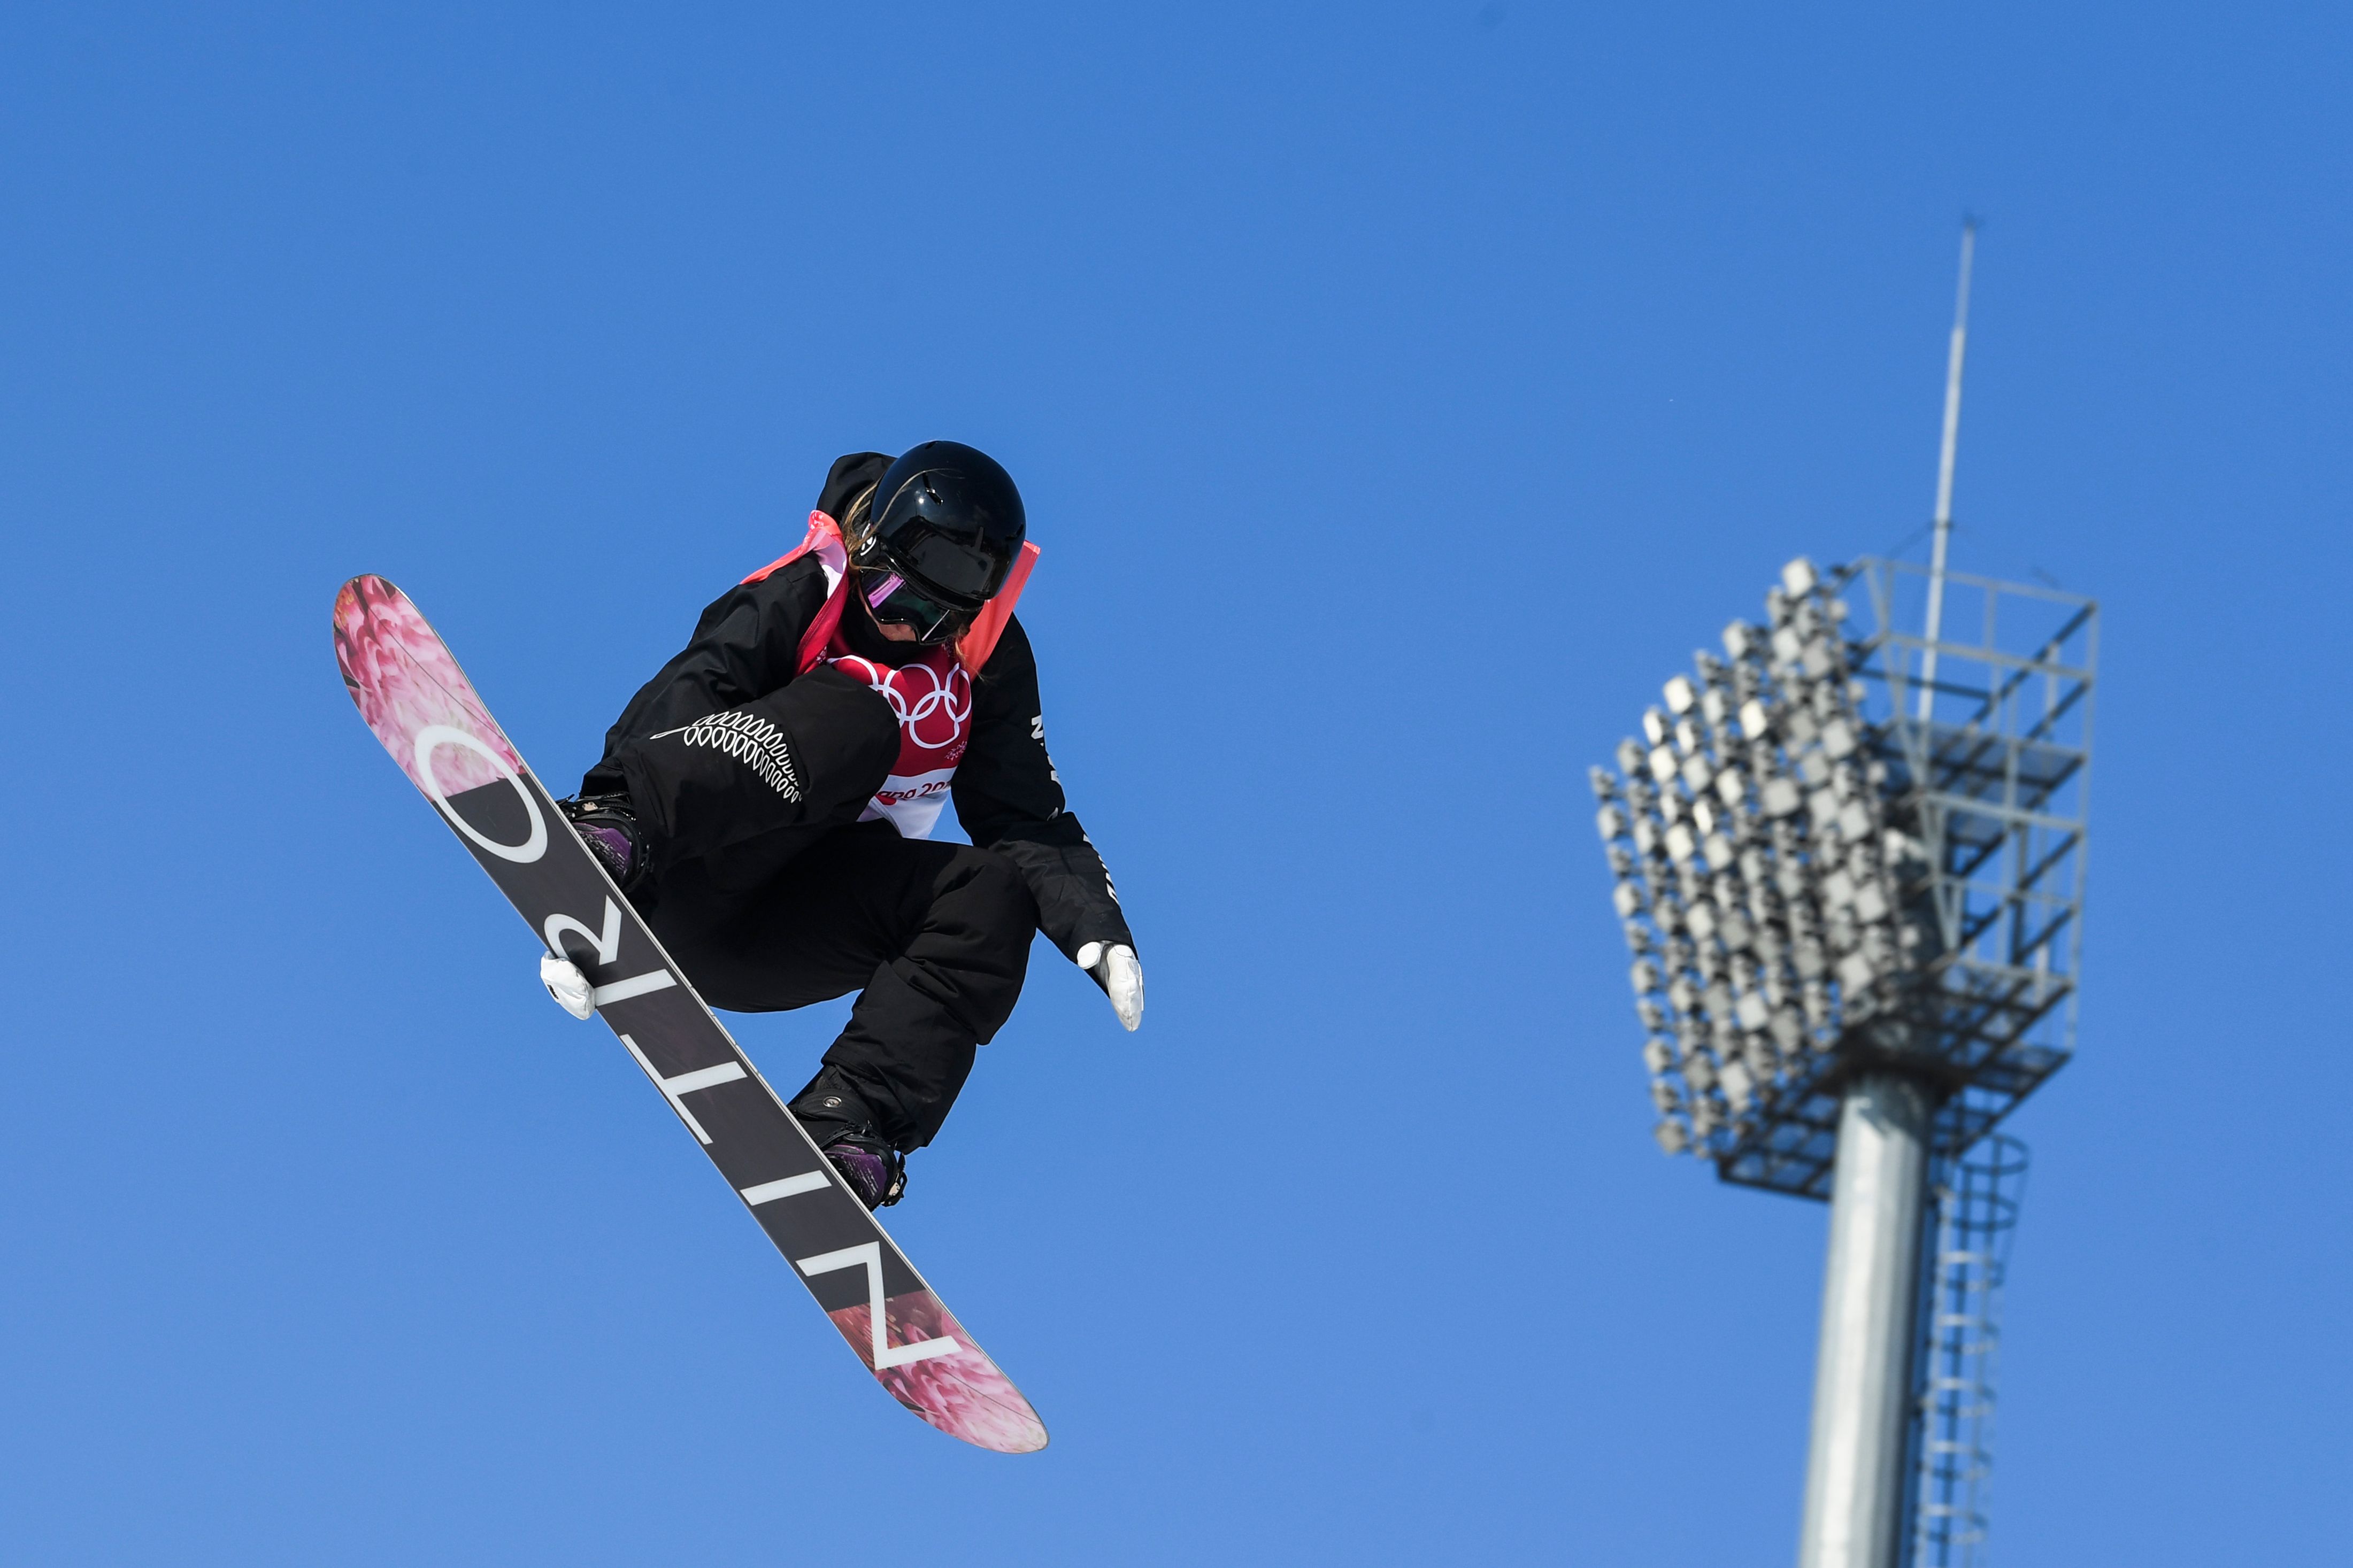 New Zealand's Zoi Sadowski Synnott competes during the women's snowboard big air final at the Pyeongchang 2018 Winter Olympic Games on Feb. 22, 2018. (Christof Stache—AFP/Getty Images)